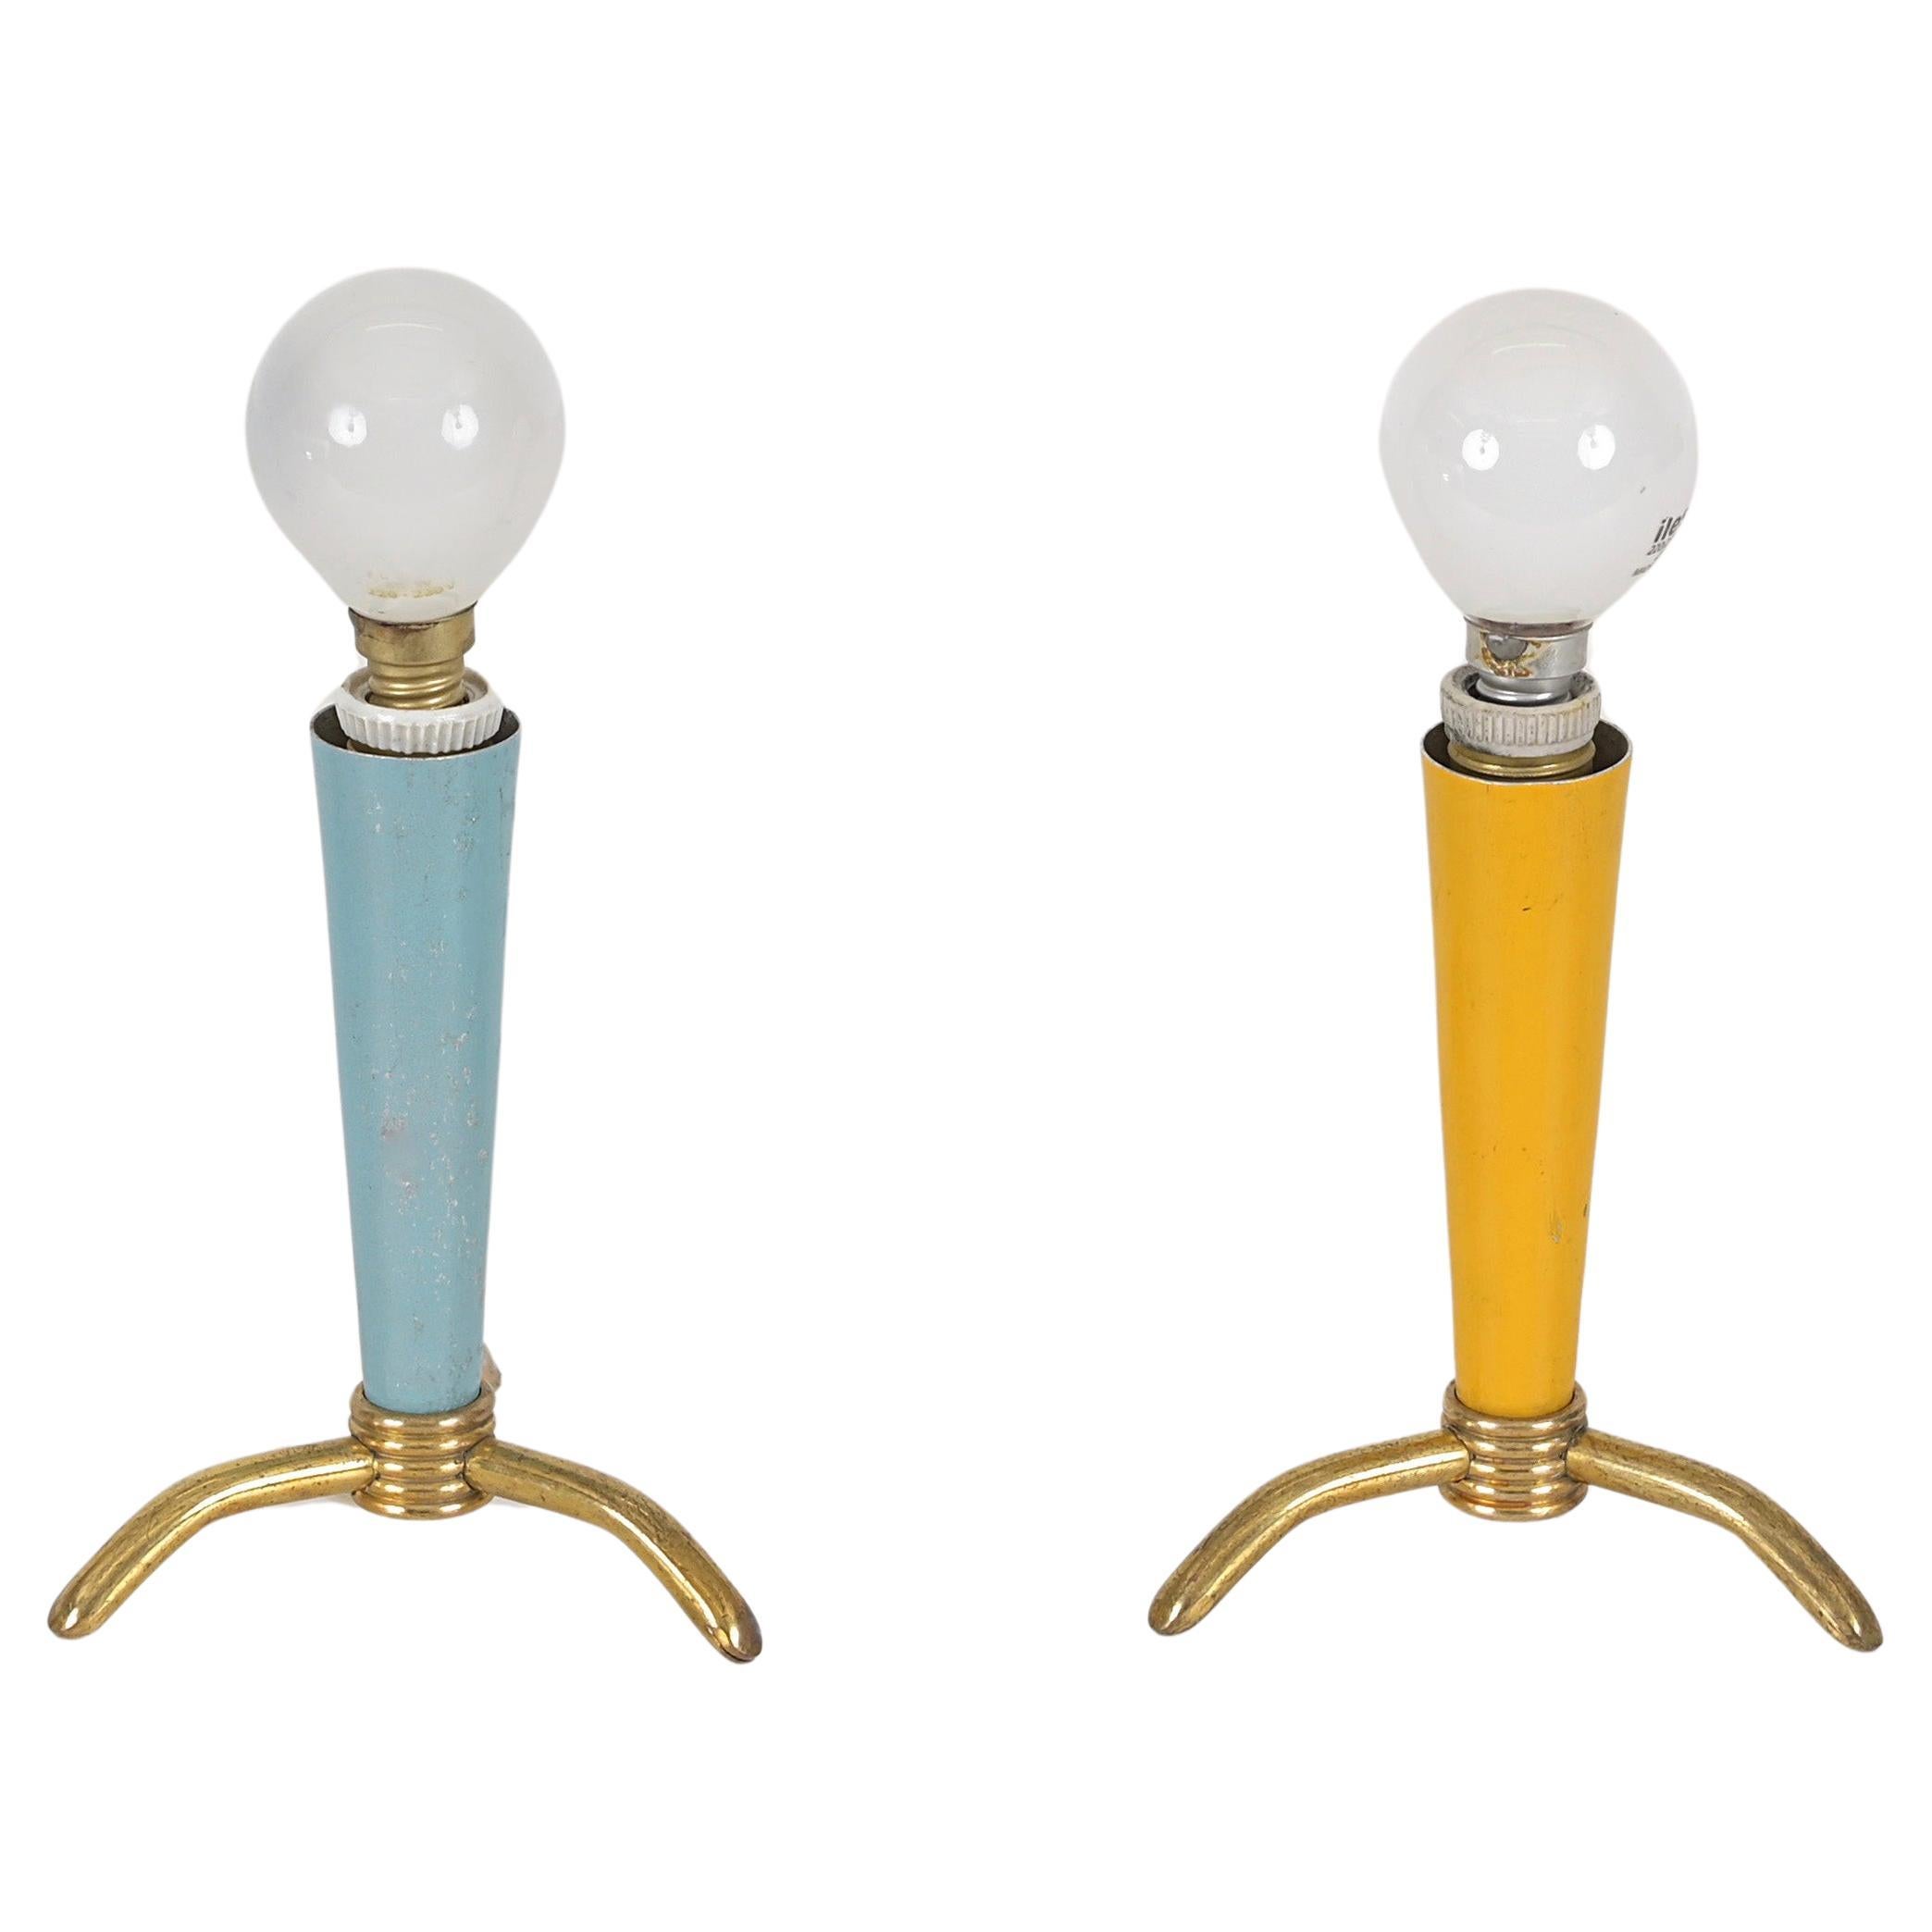 Charming pair of tripod table lamps in brass and enameled metal. This lovely lamps are attributed to Stilnovo and were made in Italy during the 1950s.

The small lamps feature a delightful cone-shaped shade in yellow and tiffany teal enameled metal